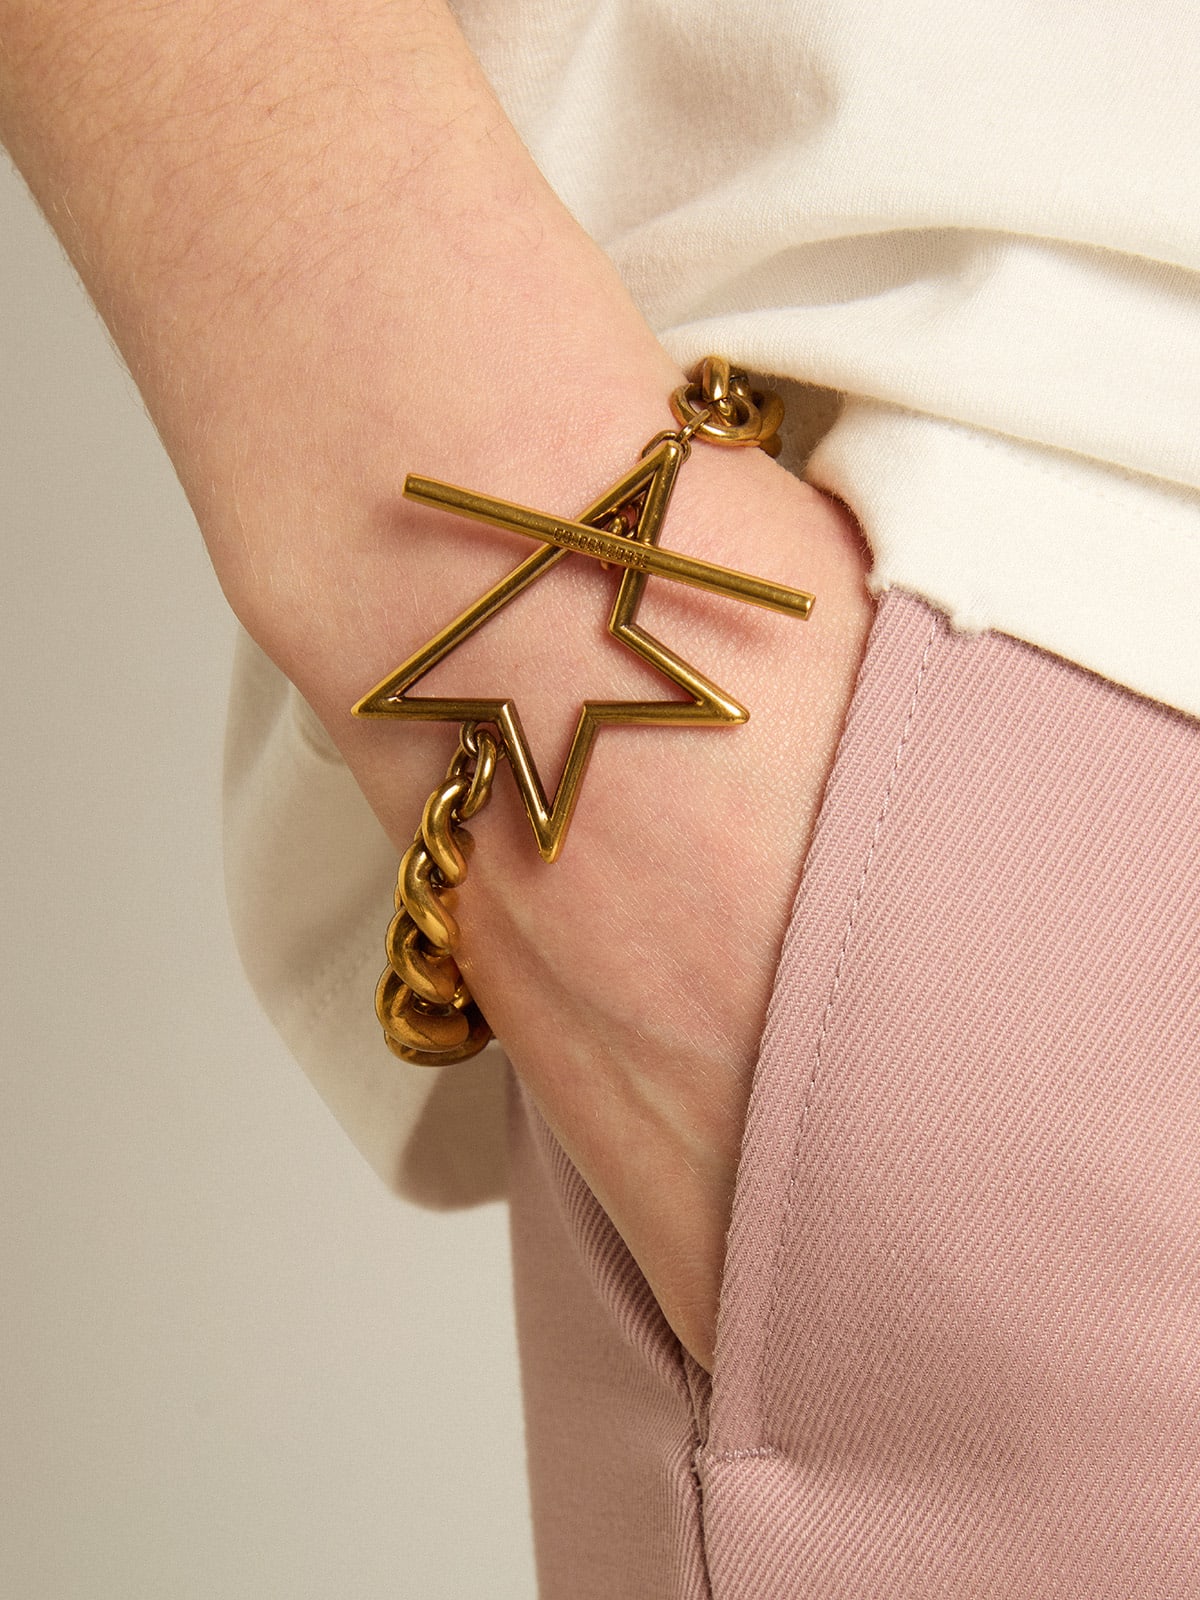 Golden Goose - Bracelet in antique gold decreasing chain with star-shaped clasp in 